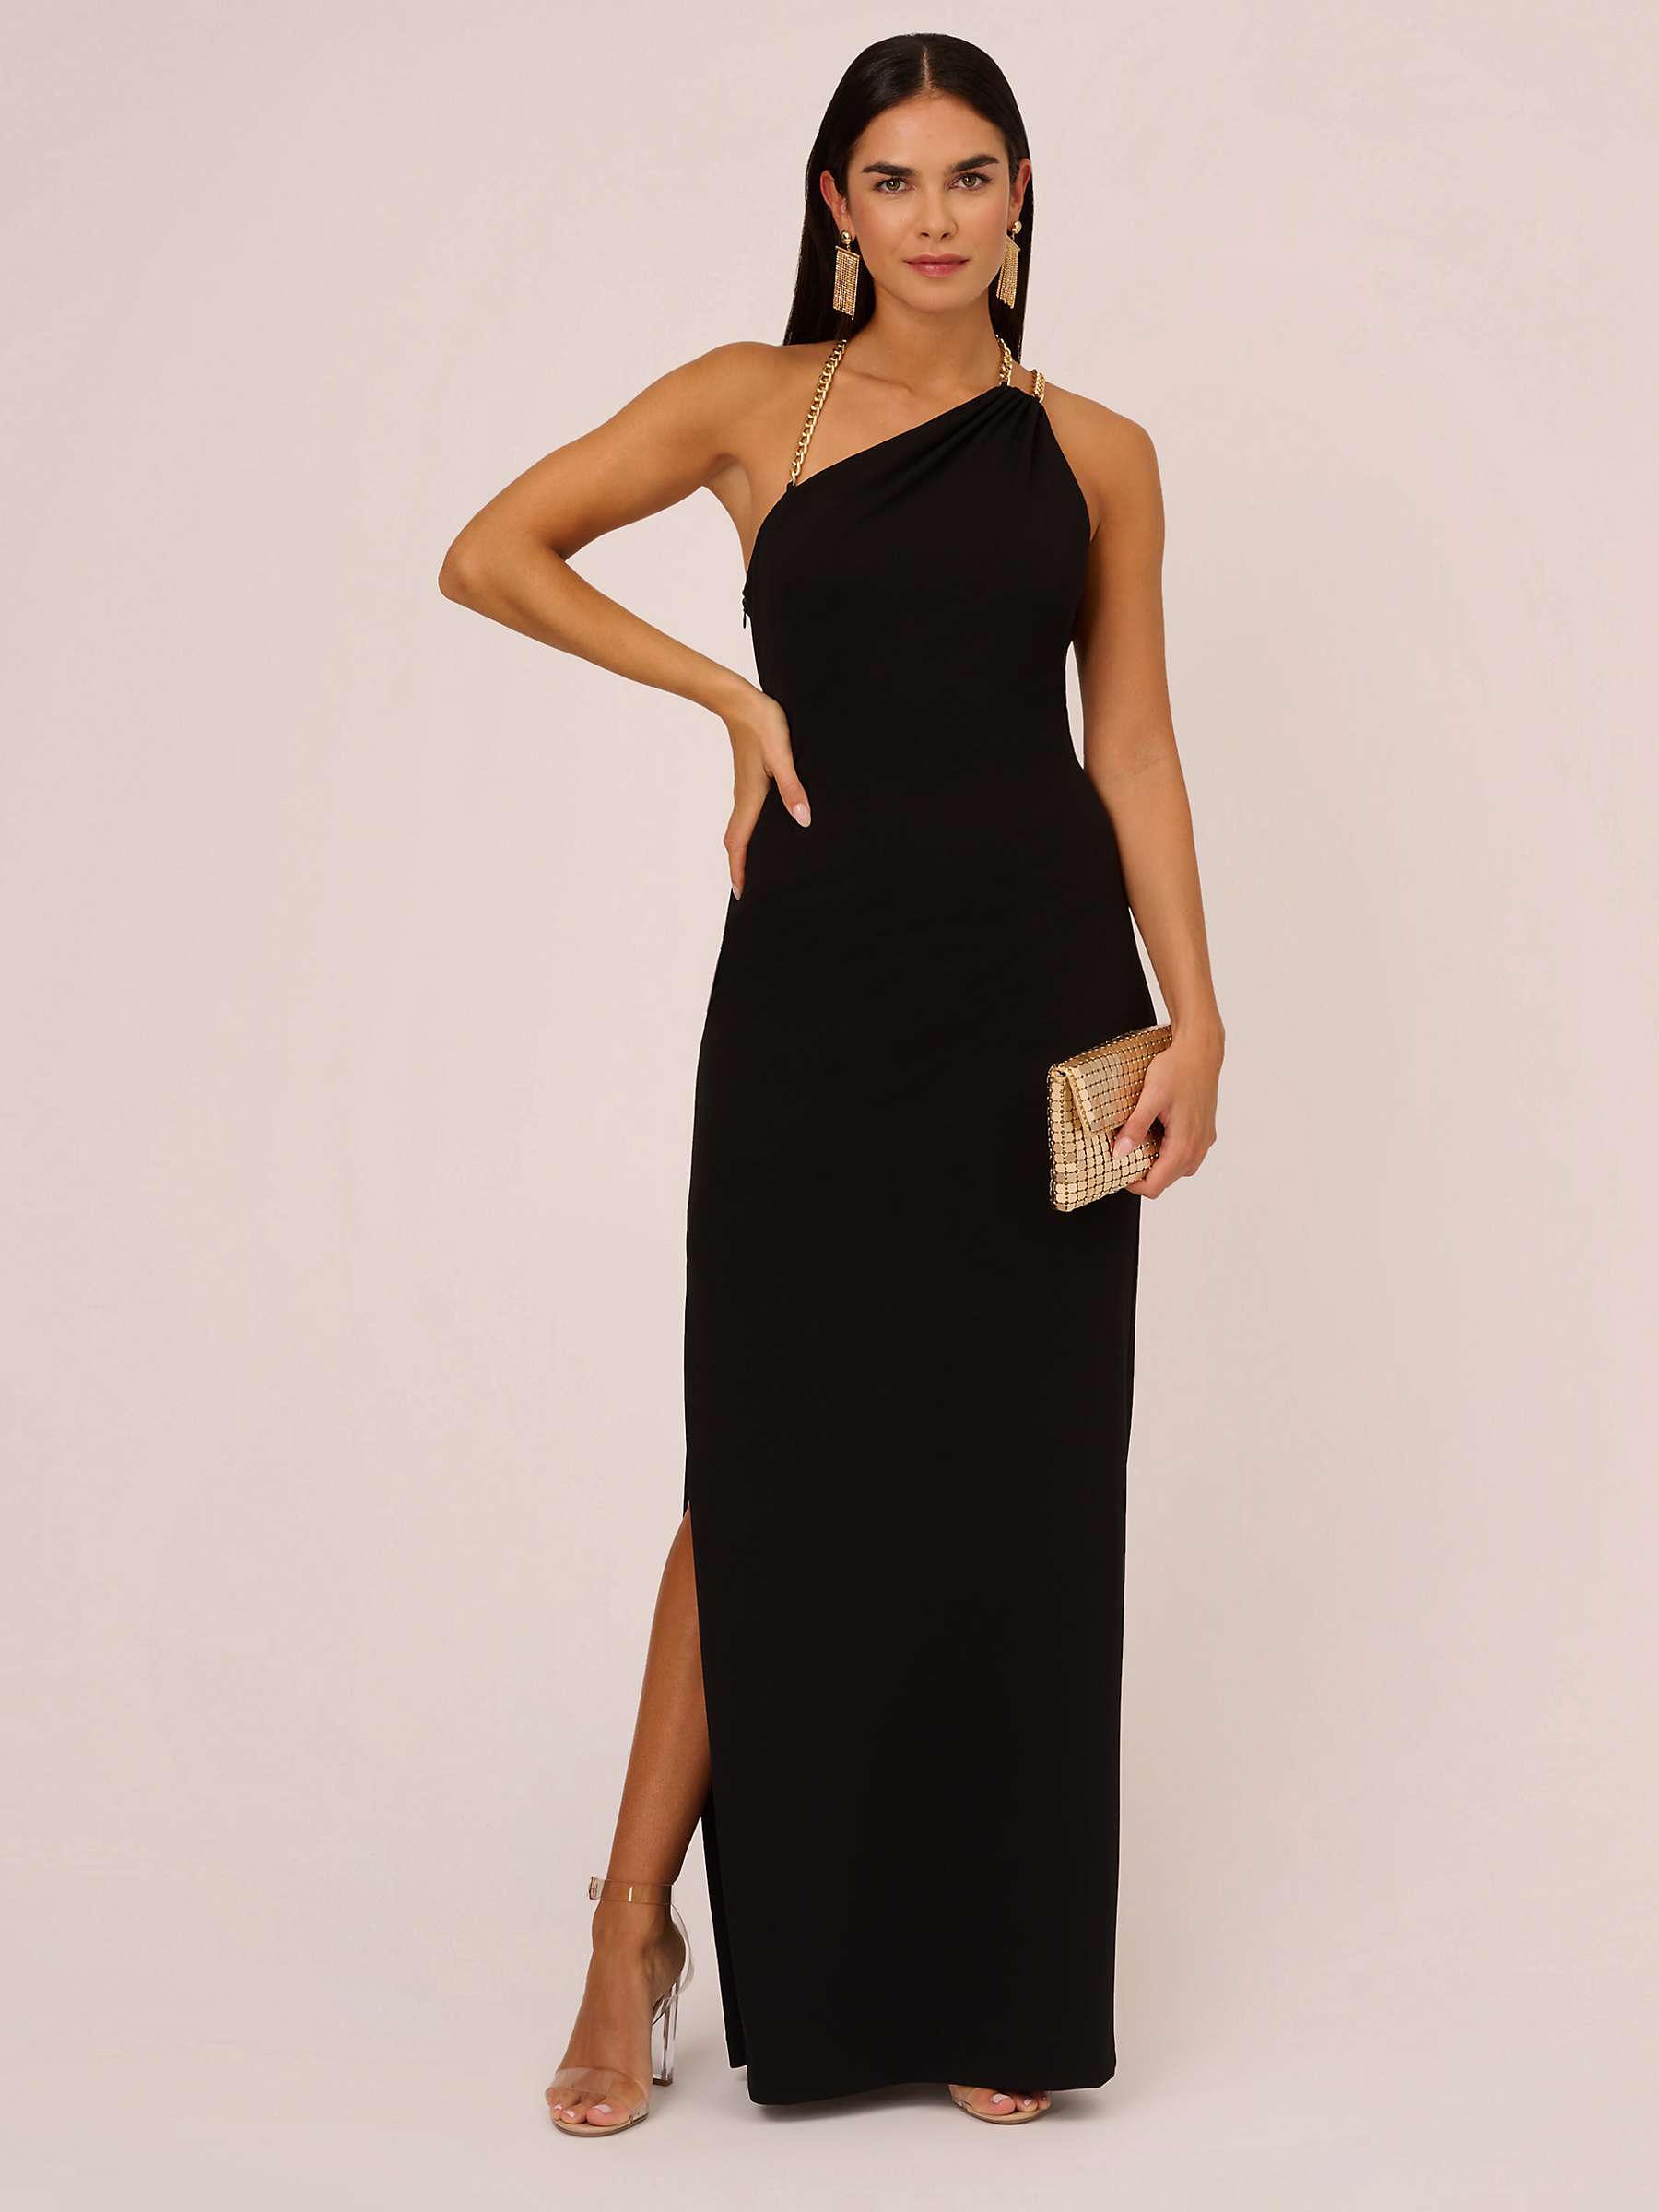 Buy Aidan by Adrianna Papell Chain Strap Column Dress, Black Online at johnlewis.com